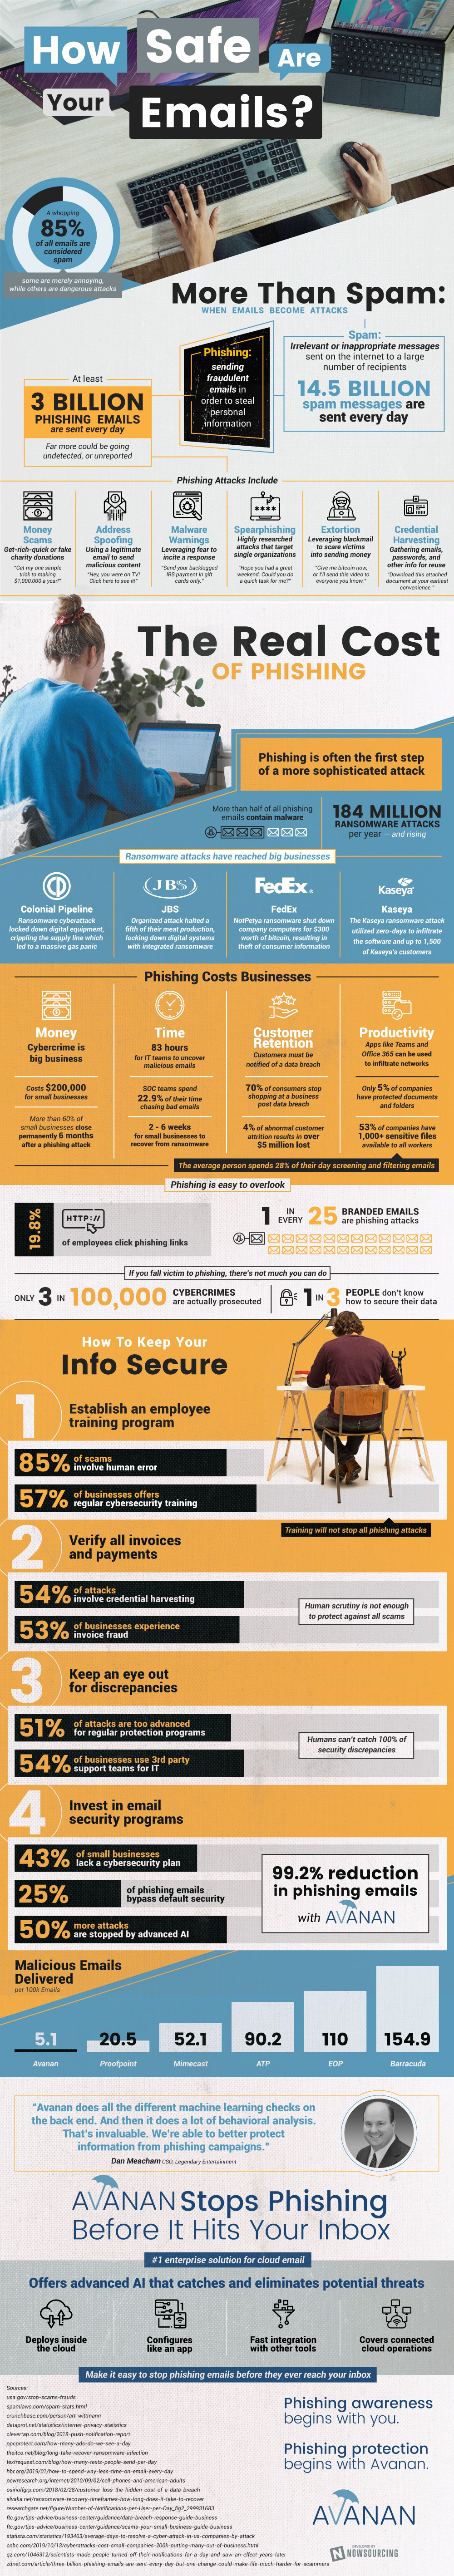 How Safe Are Your Emails? [infographic]